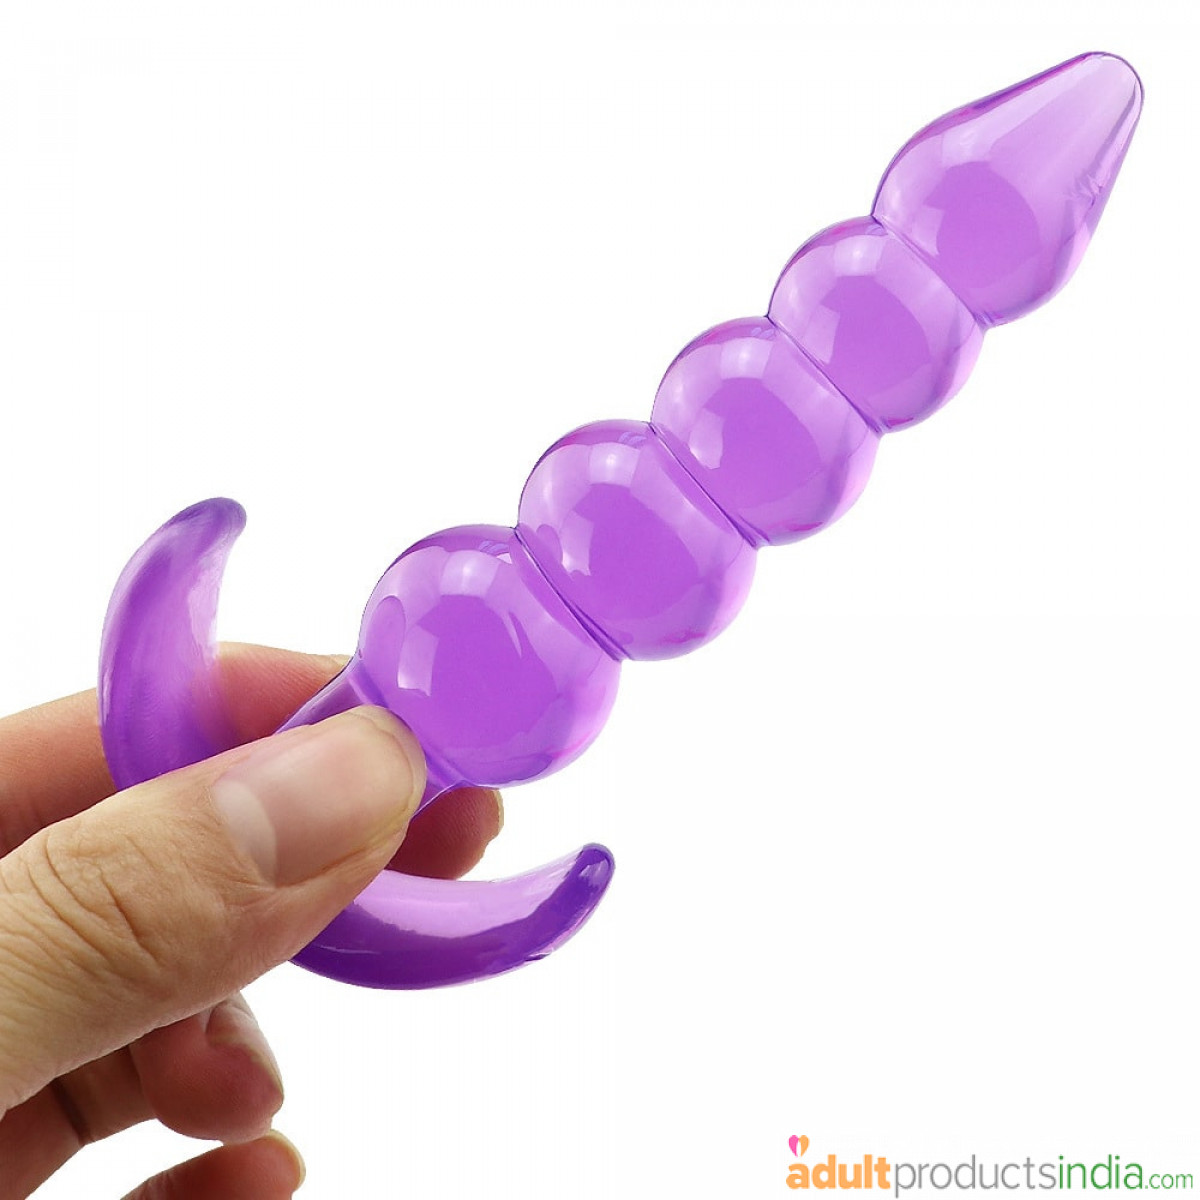 Silicone Unisex Anal Beads Butt Plug 